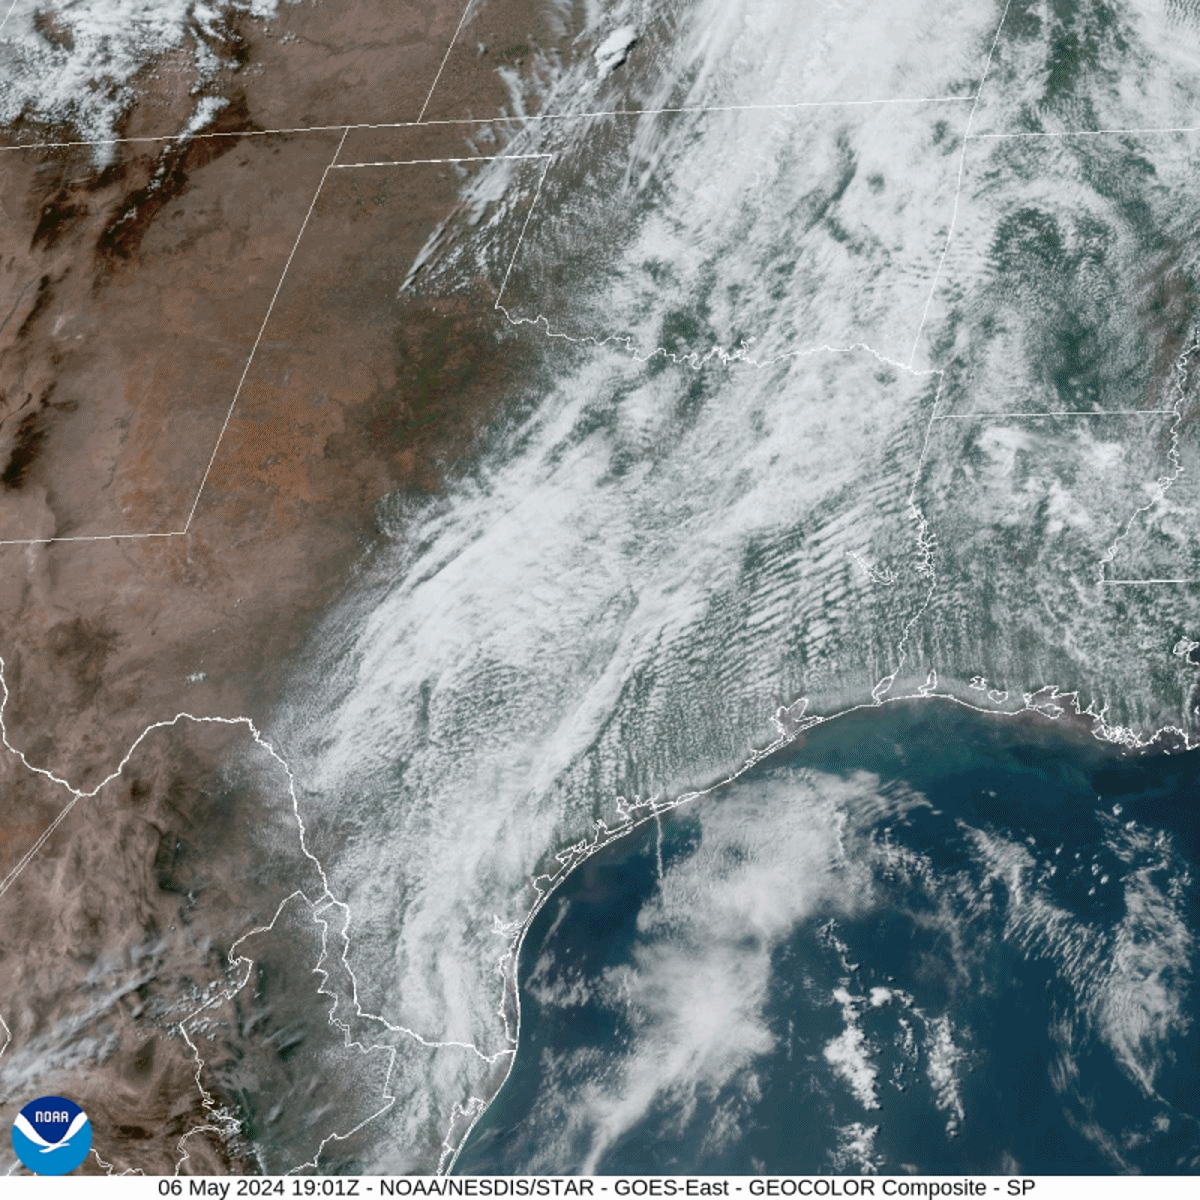 Regional GeoColor Satellite Loop from 2:01 pm CDT to 8:01 pm CDT on May 6, 2024